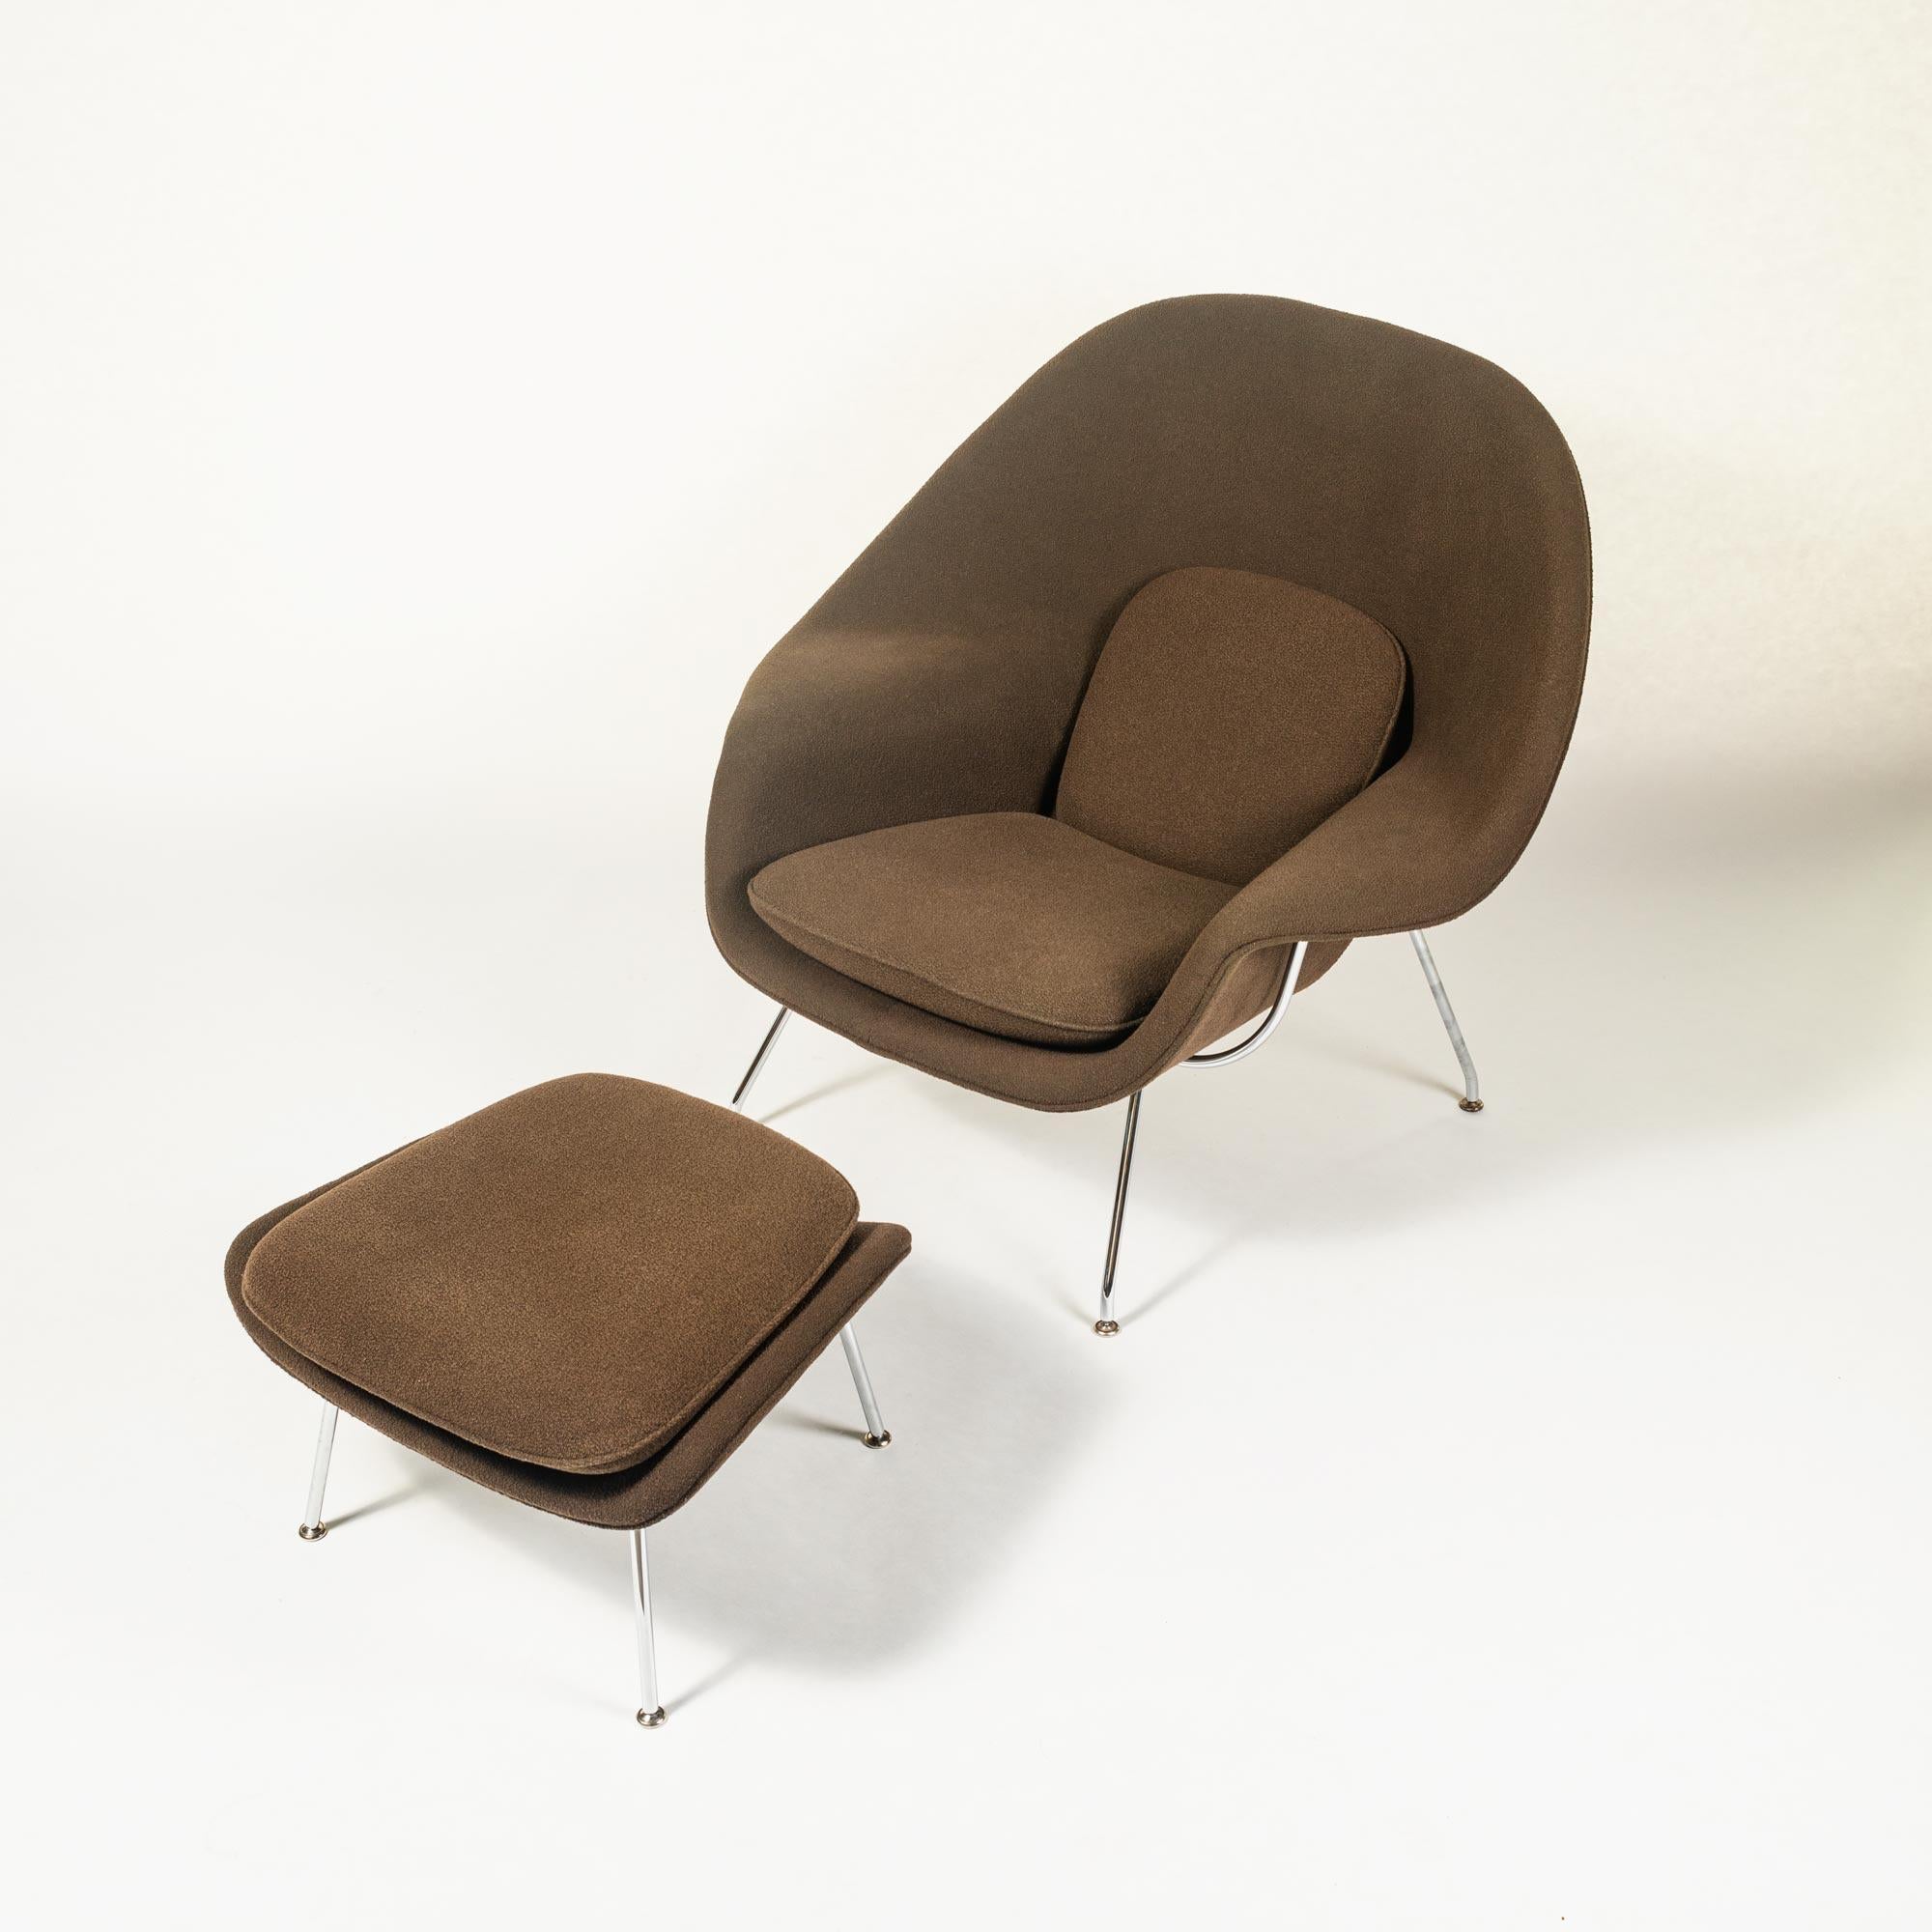 One of the most iconic chair designs of the 20th century, Eero Saarinen designed this lounge chair for Florence Knoll at the request of “a chair that was like a basket full of pillows.” This original early 1990s Womb Chair and ottoman set is